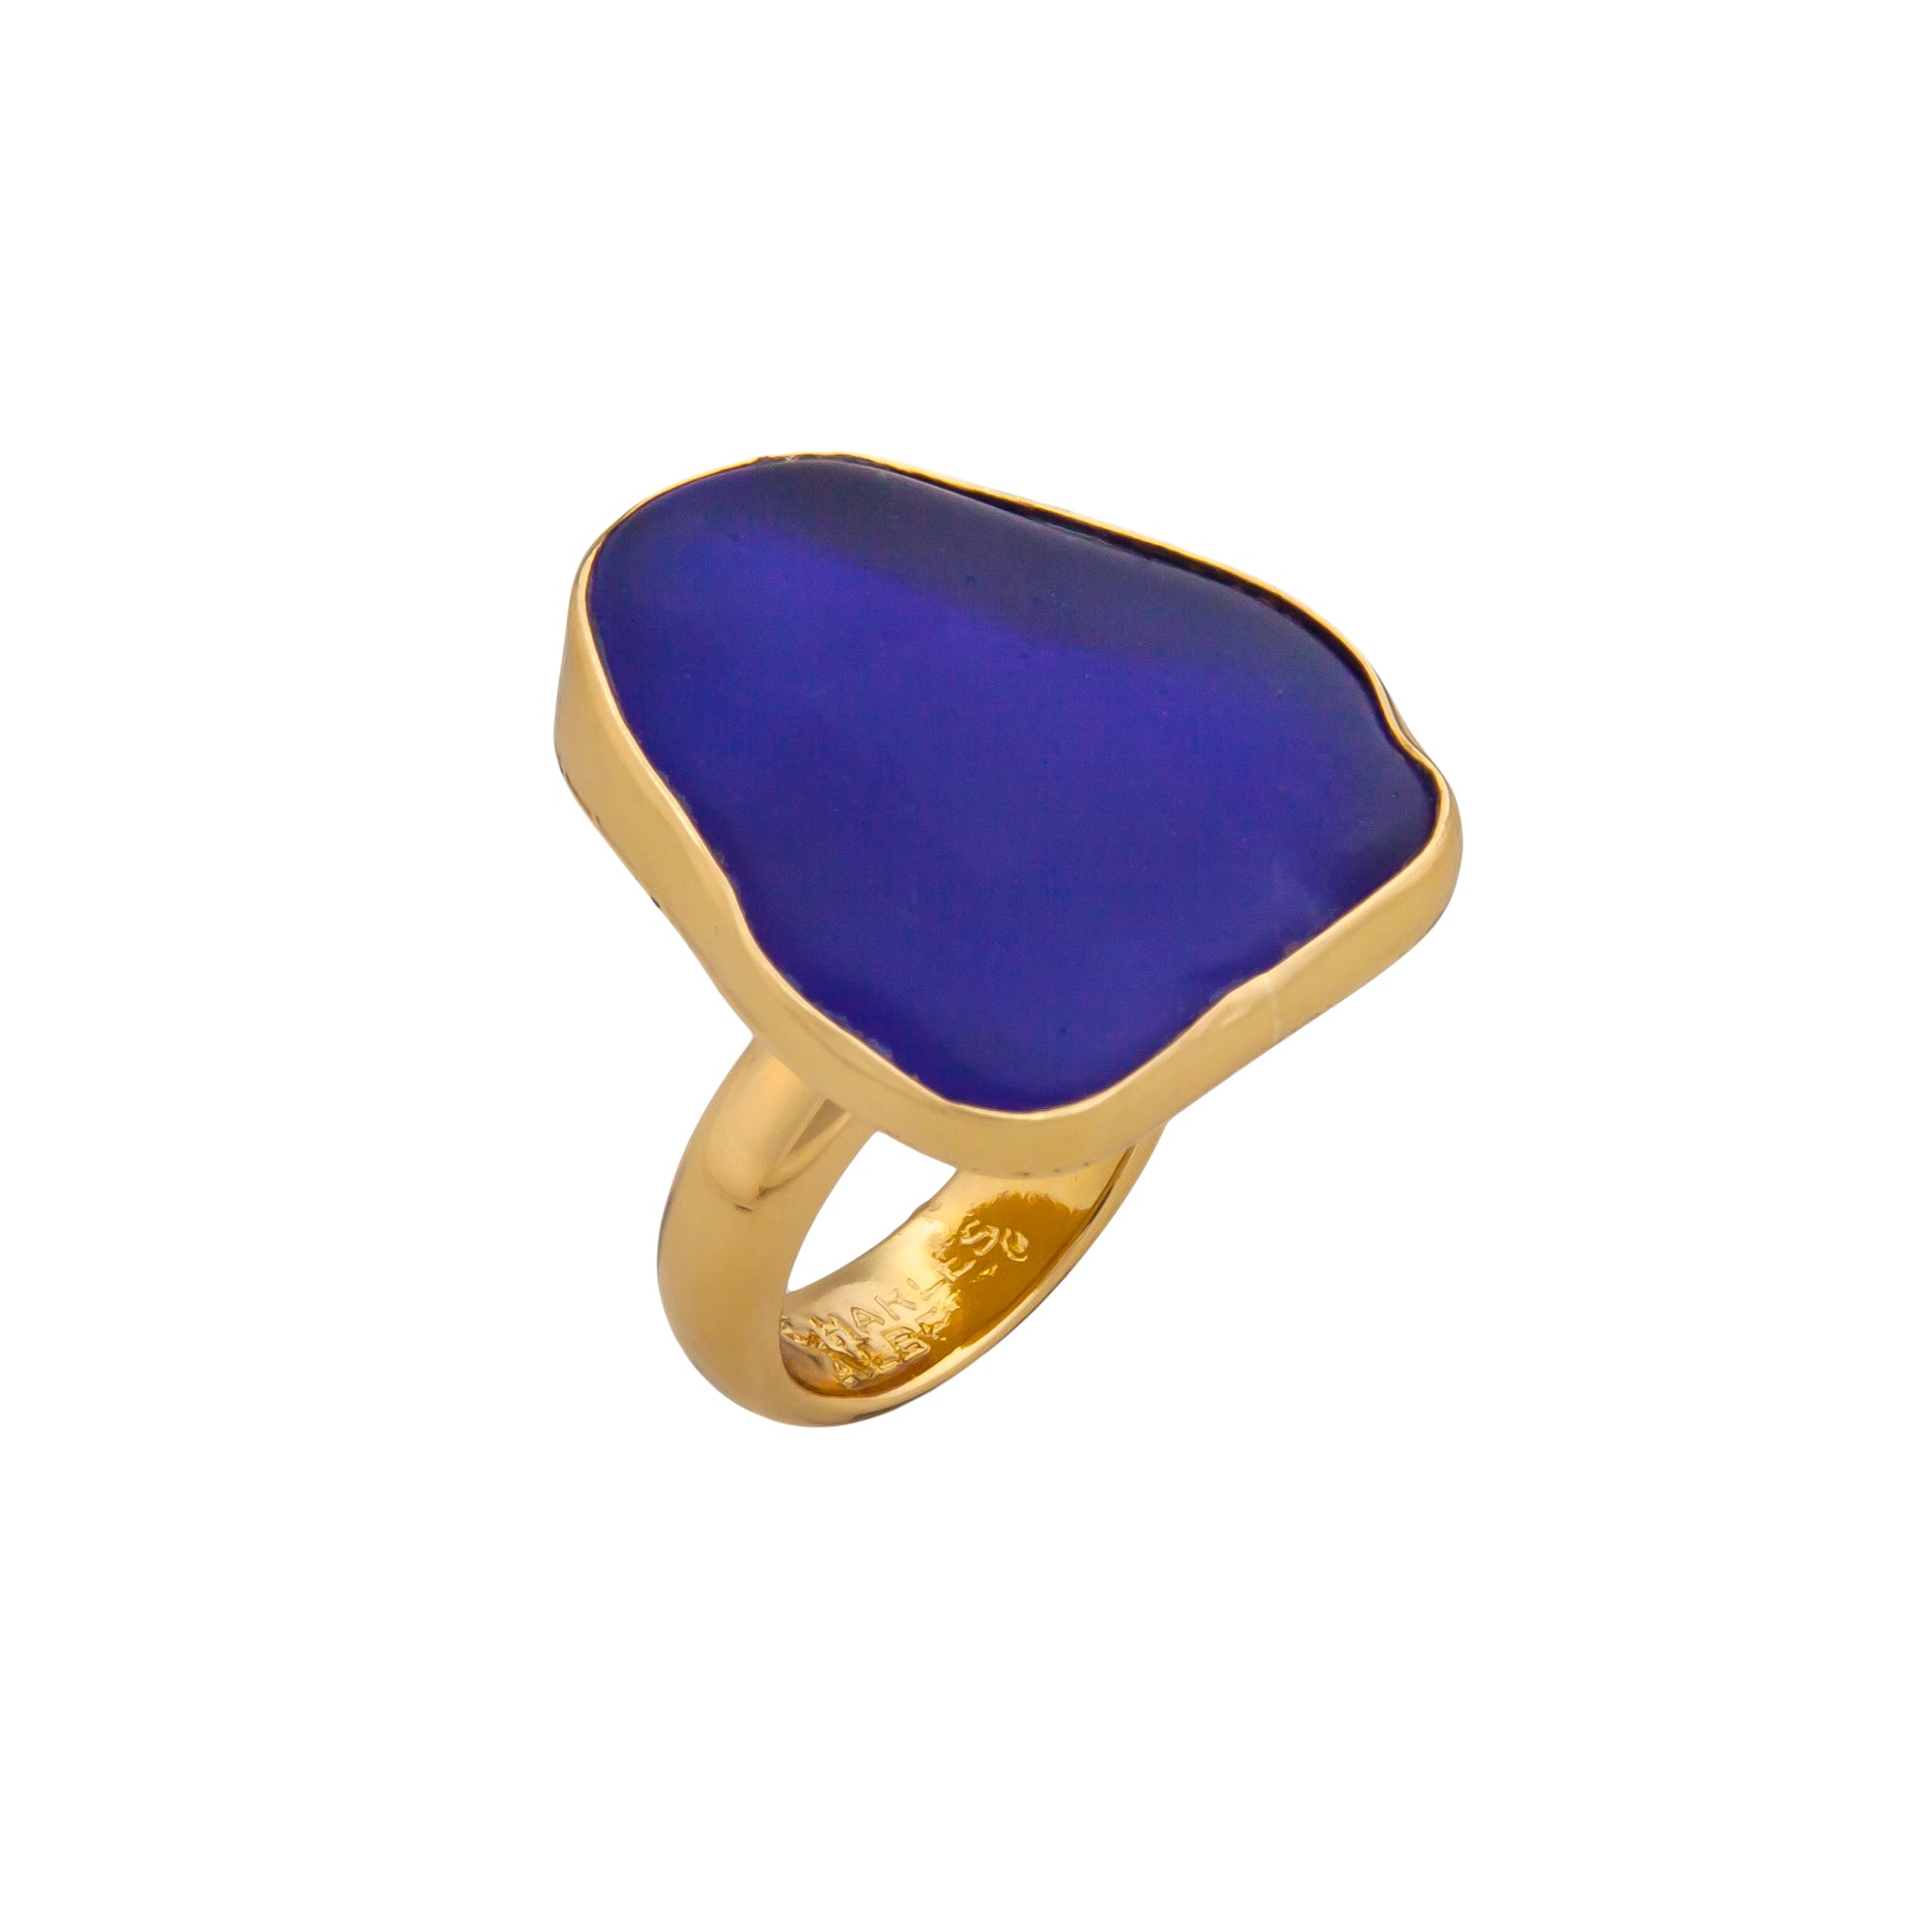 Alchemia Cobalt Blue Recycled Glass Adjustable Ring - Charles Albert Inc